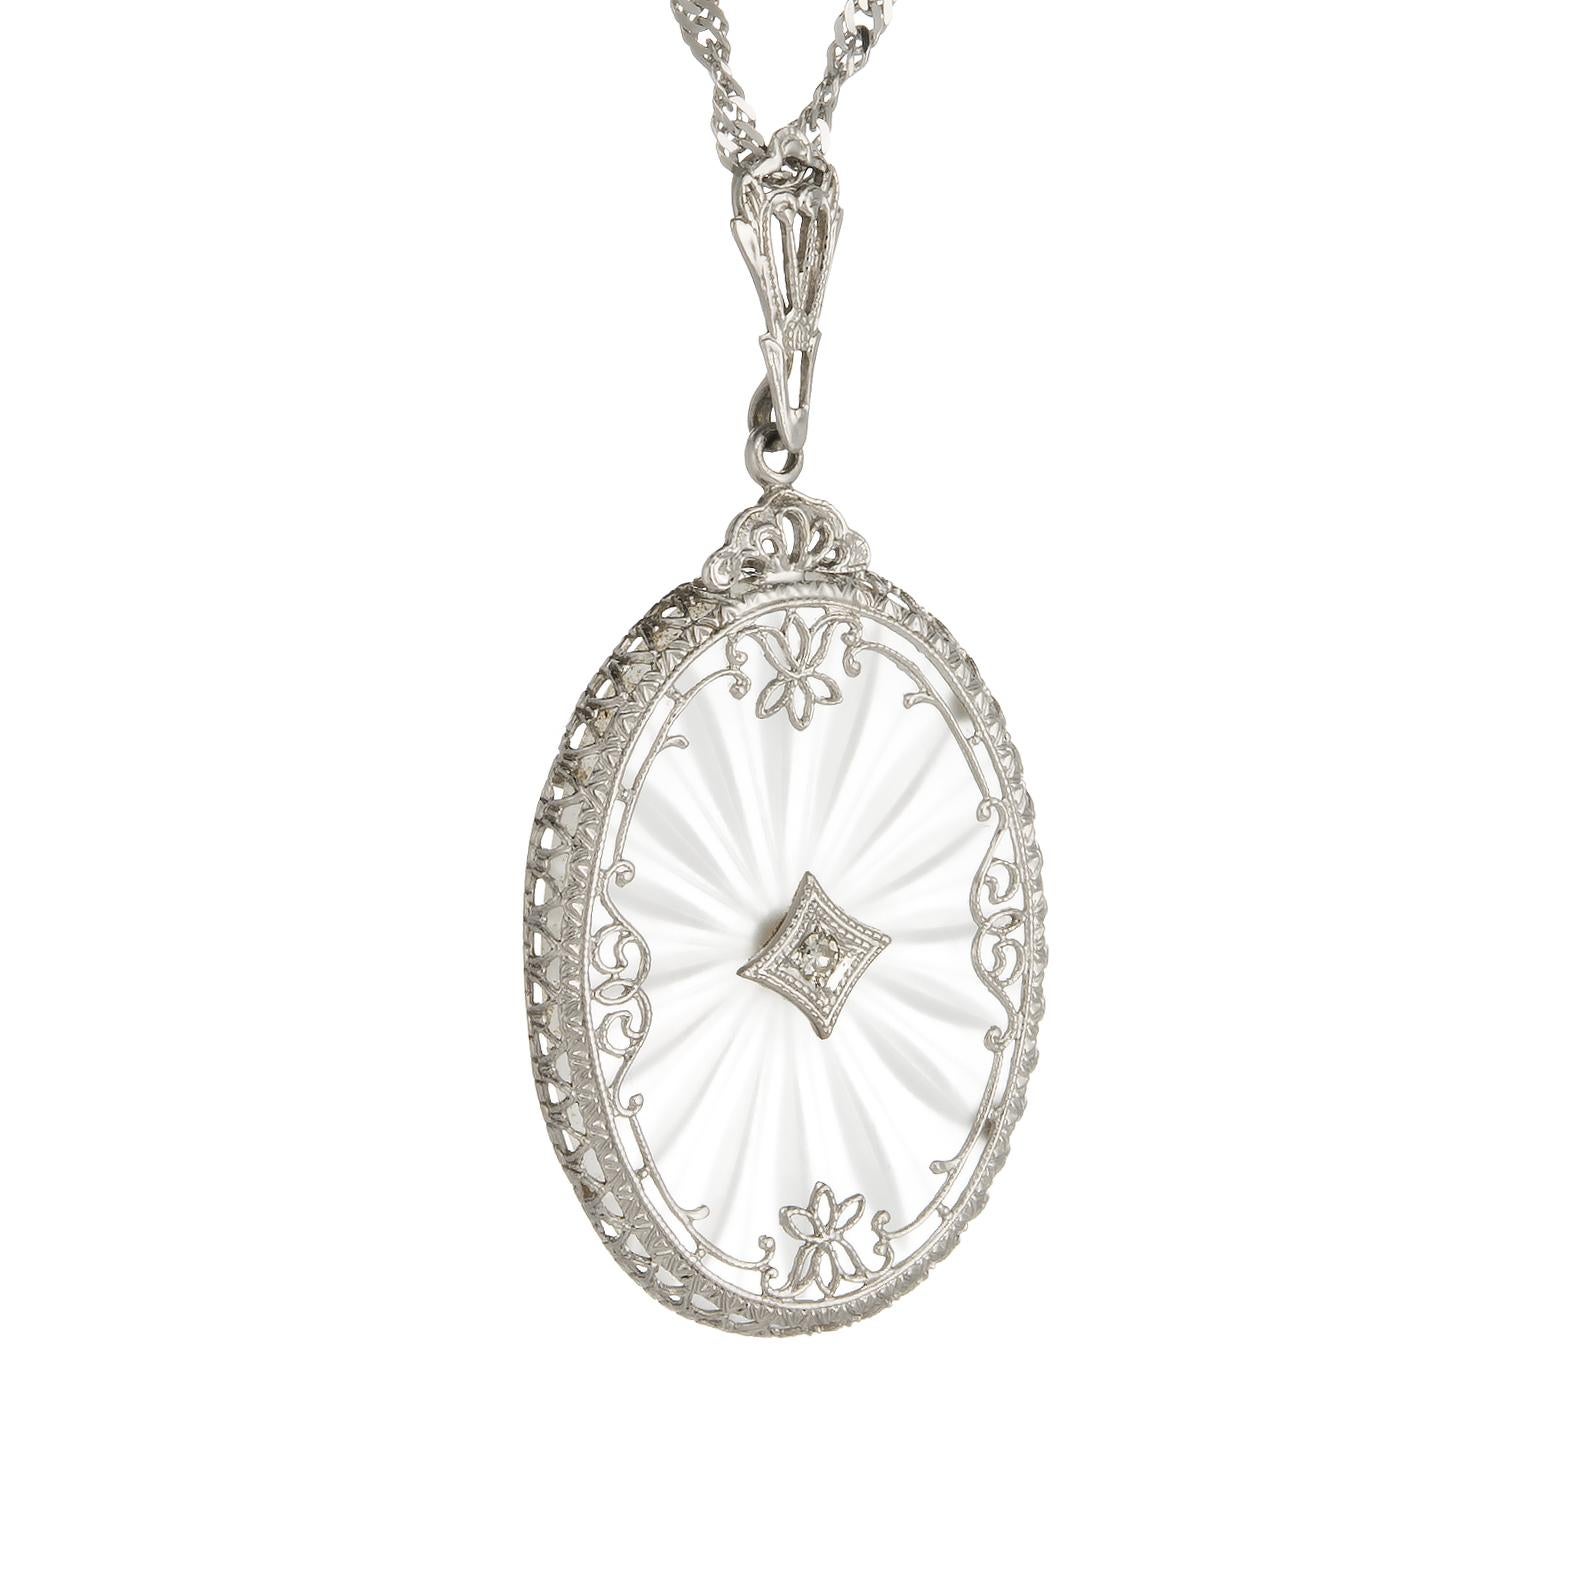 Elegant and finely detailed Art Deco era necklace (circa 1920s to 1930s), crafted in 14 karat white gold.  

Rock crystal is oval cut measuring 23mm x 16mm, accented with an estimated 0.01 carat single cut diamond (estimated at K-L color and SI1